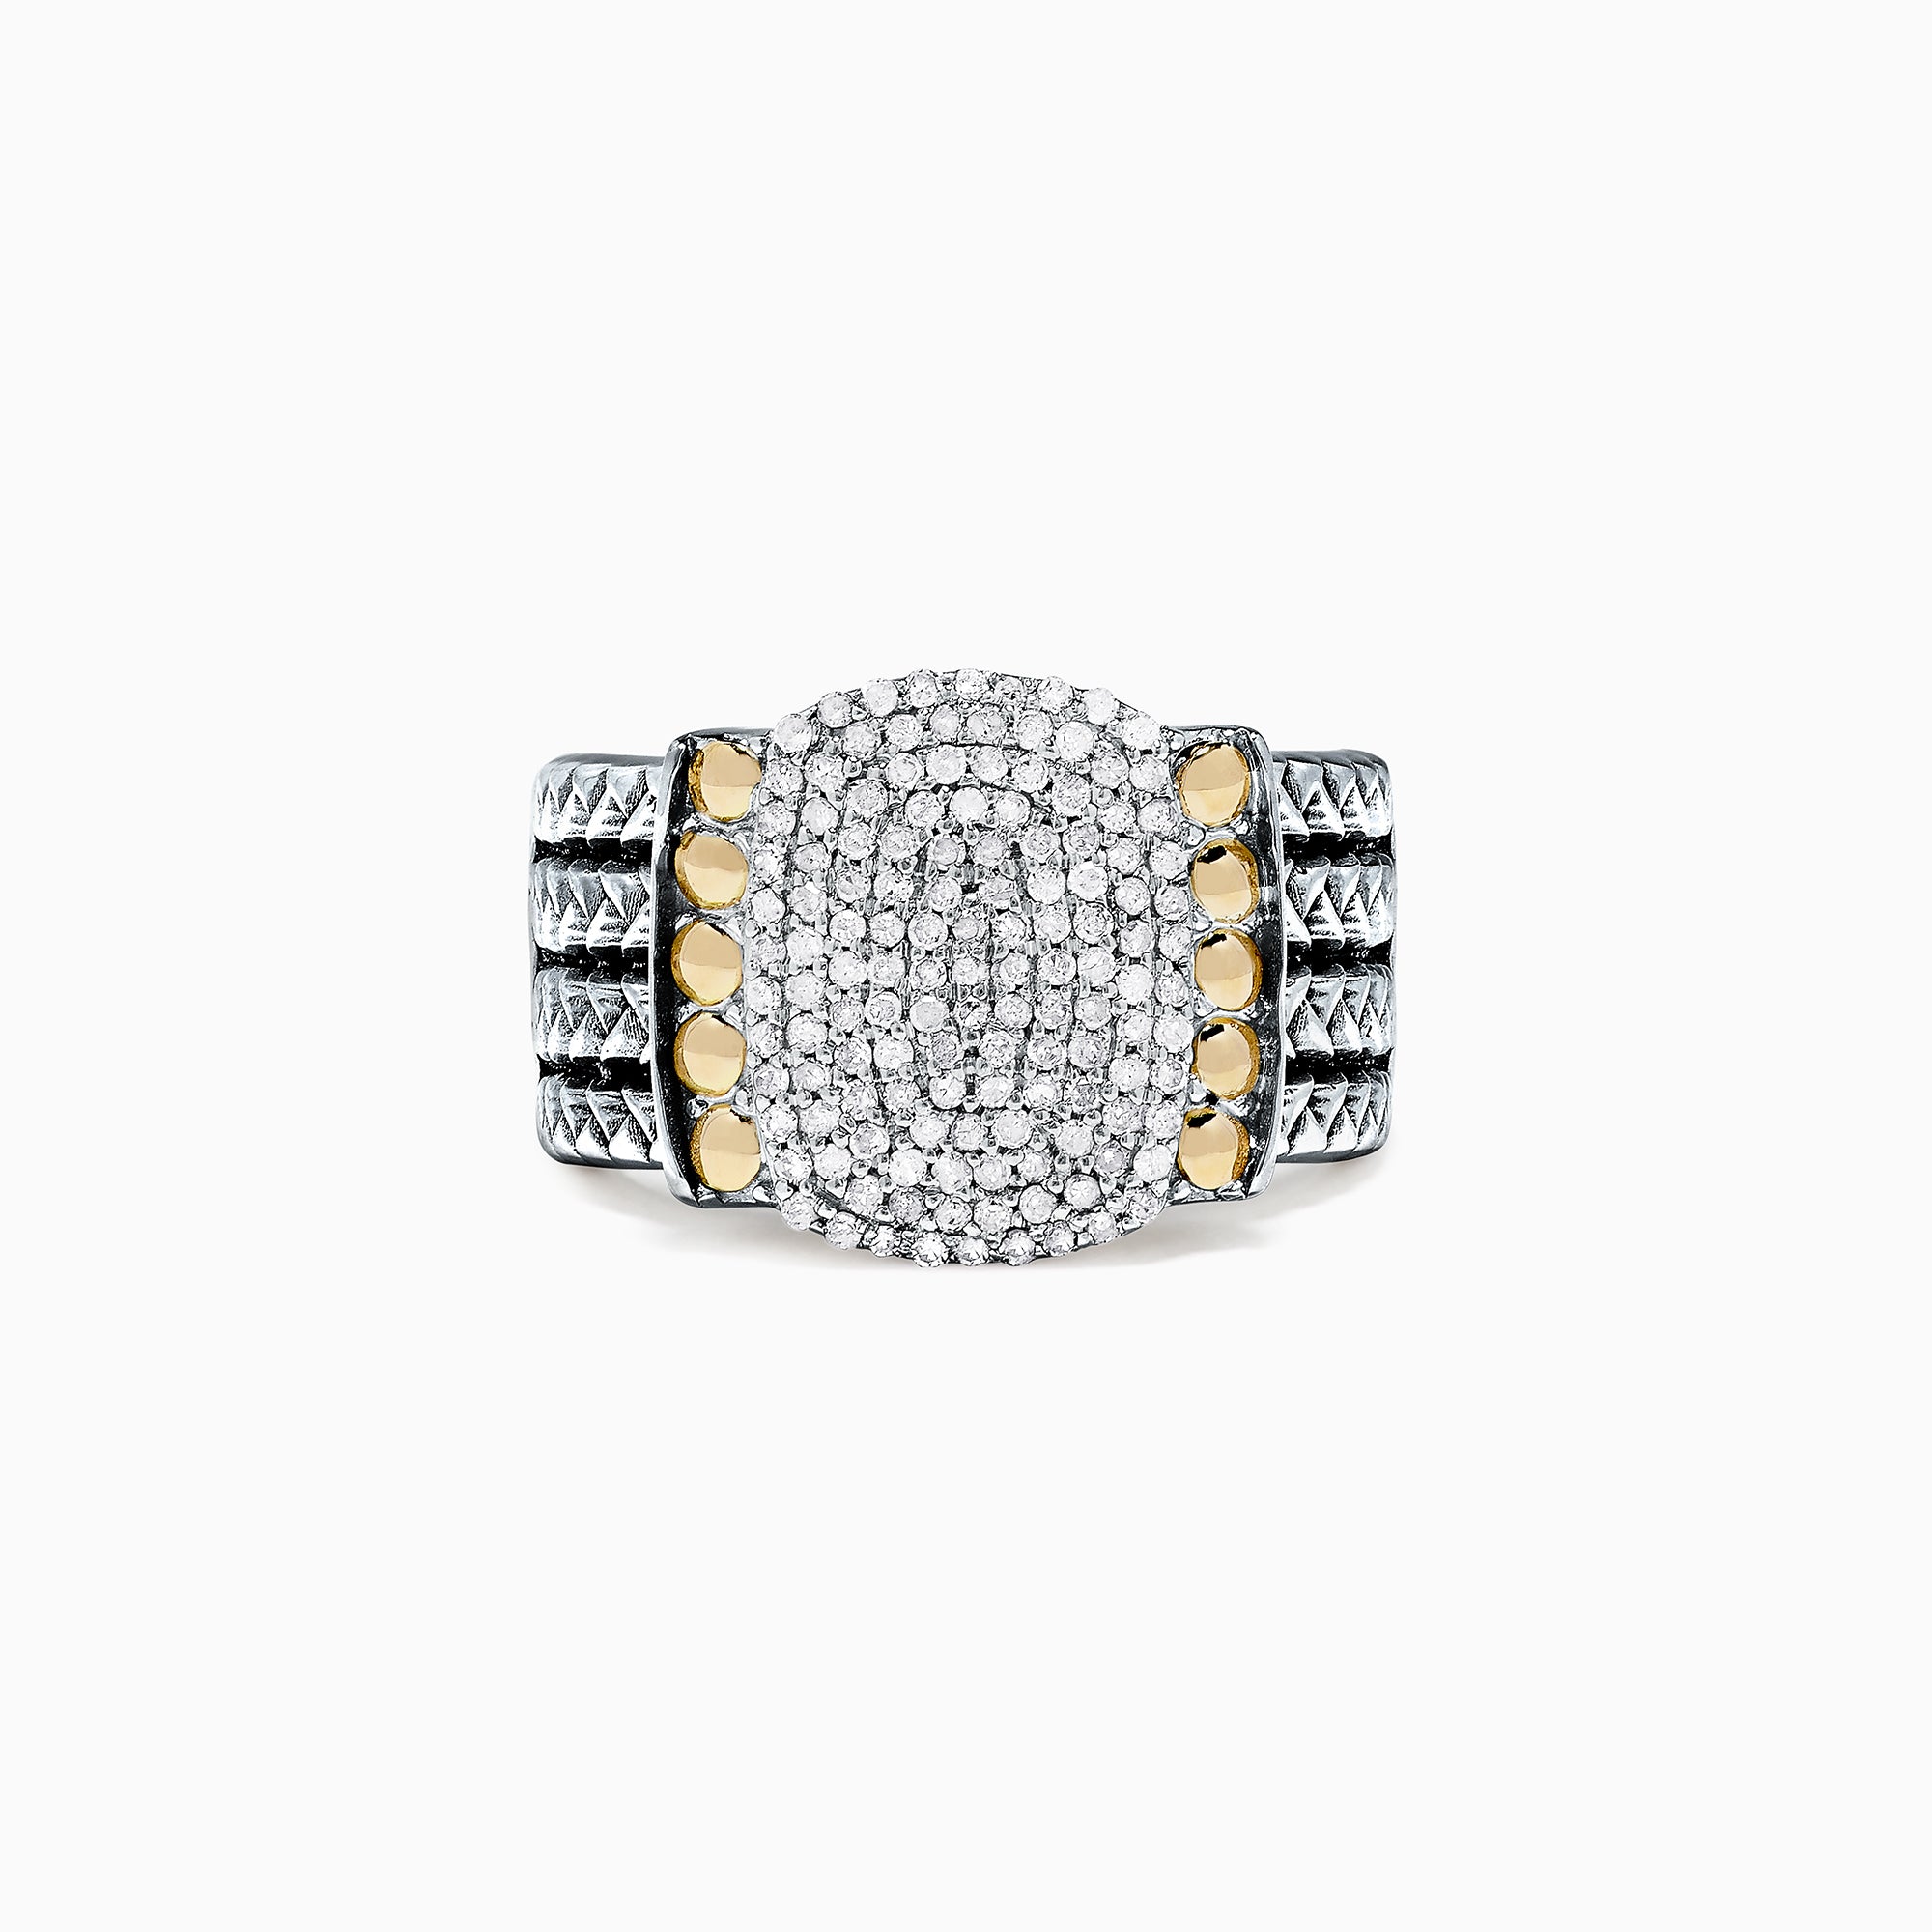 Effy Sterling Silver and 18K Yellow Gold Diamond Ring, 0.52 TCW